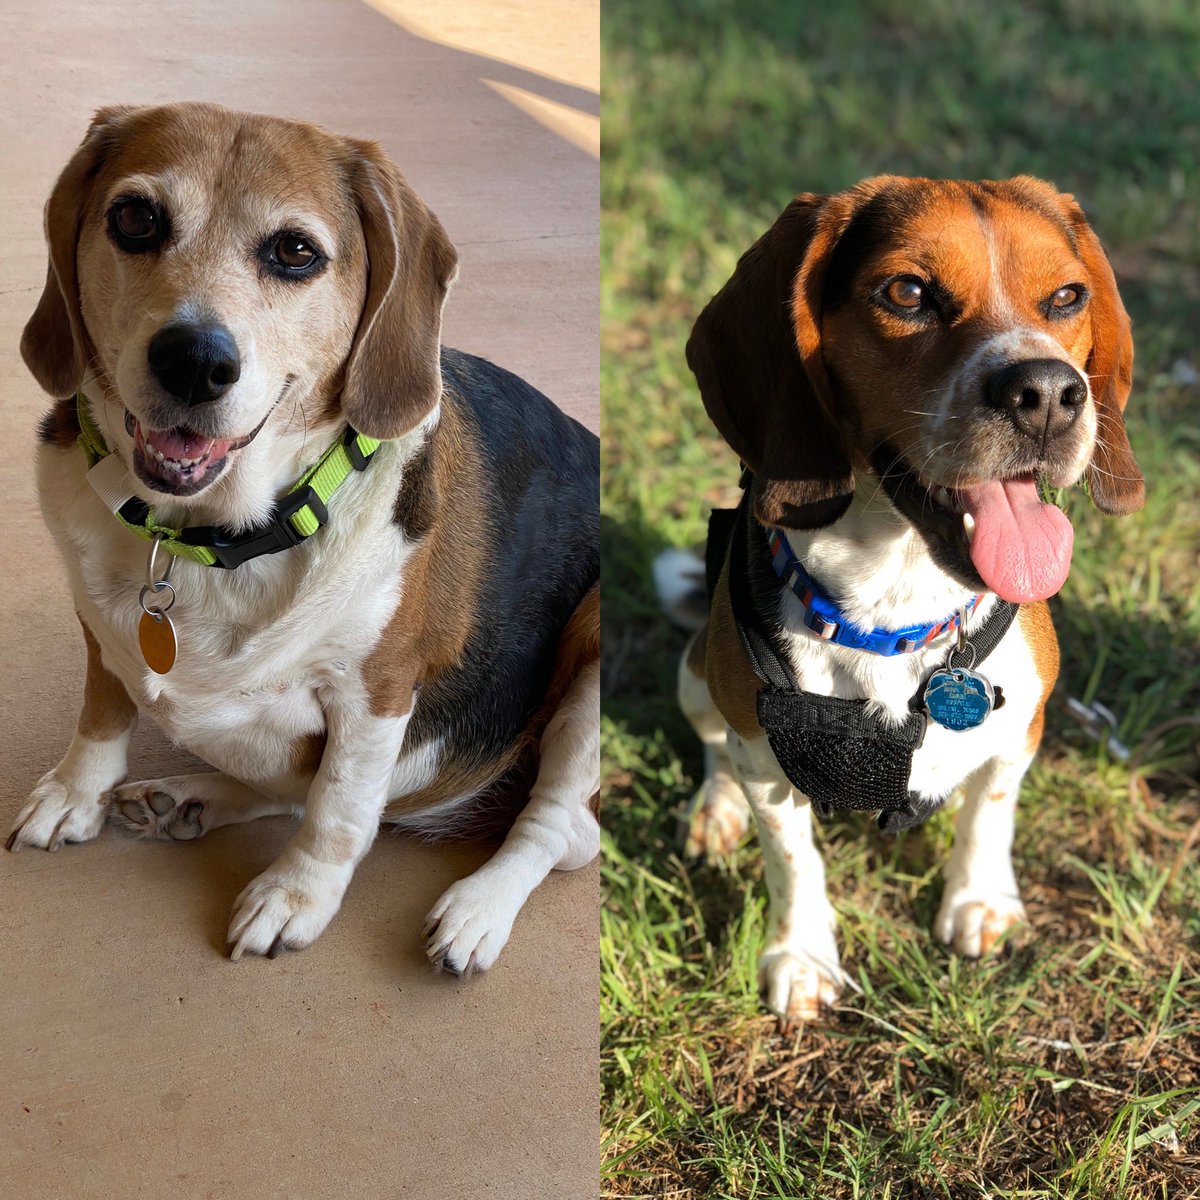 It’s #NationalPet day!! Here are my two spoiled rotten #beagles Reagan and Paisley. Both have such diverse personalities & are total hams for the camera #BeagleBrigade #FloppyEarCrew #had3 😢